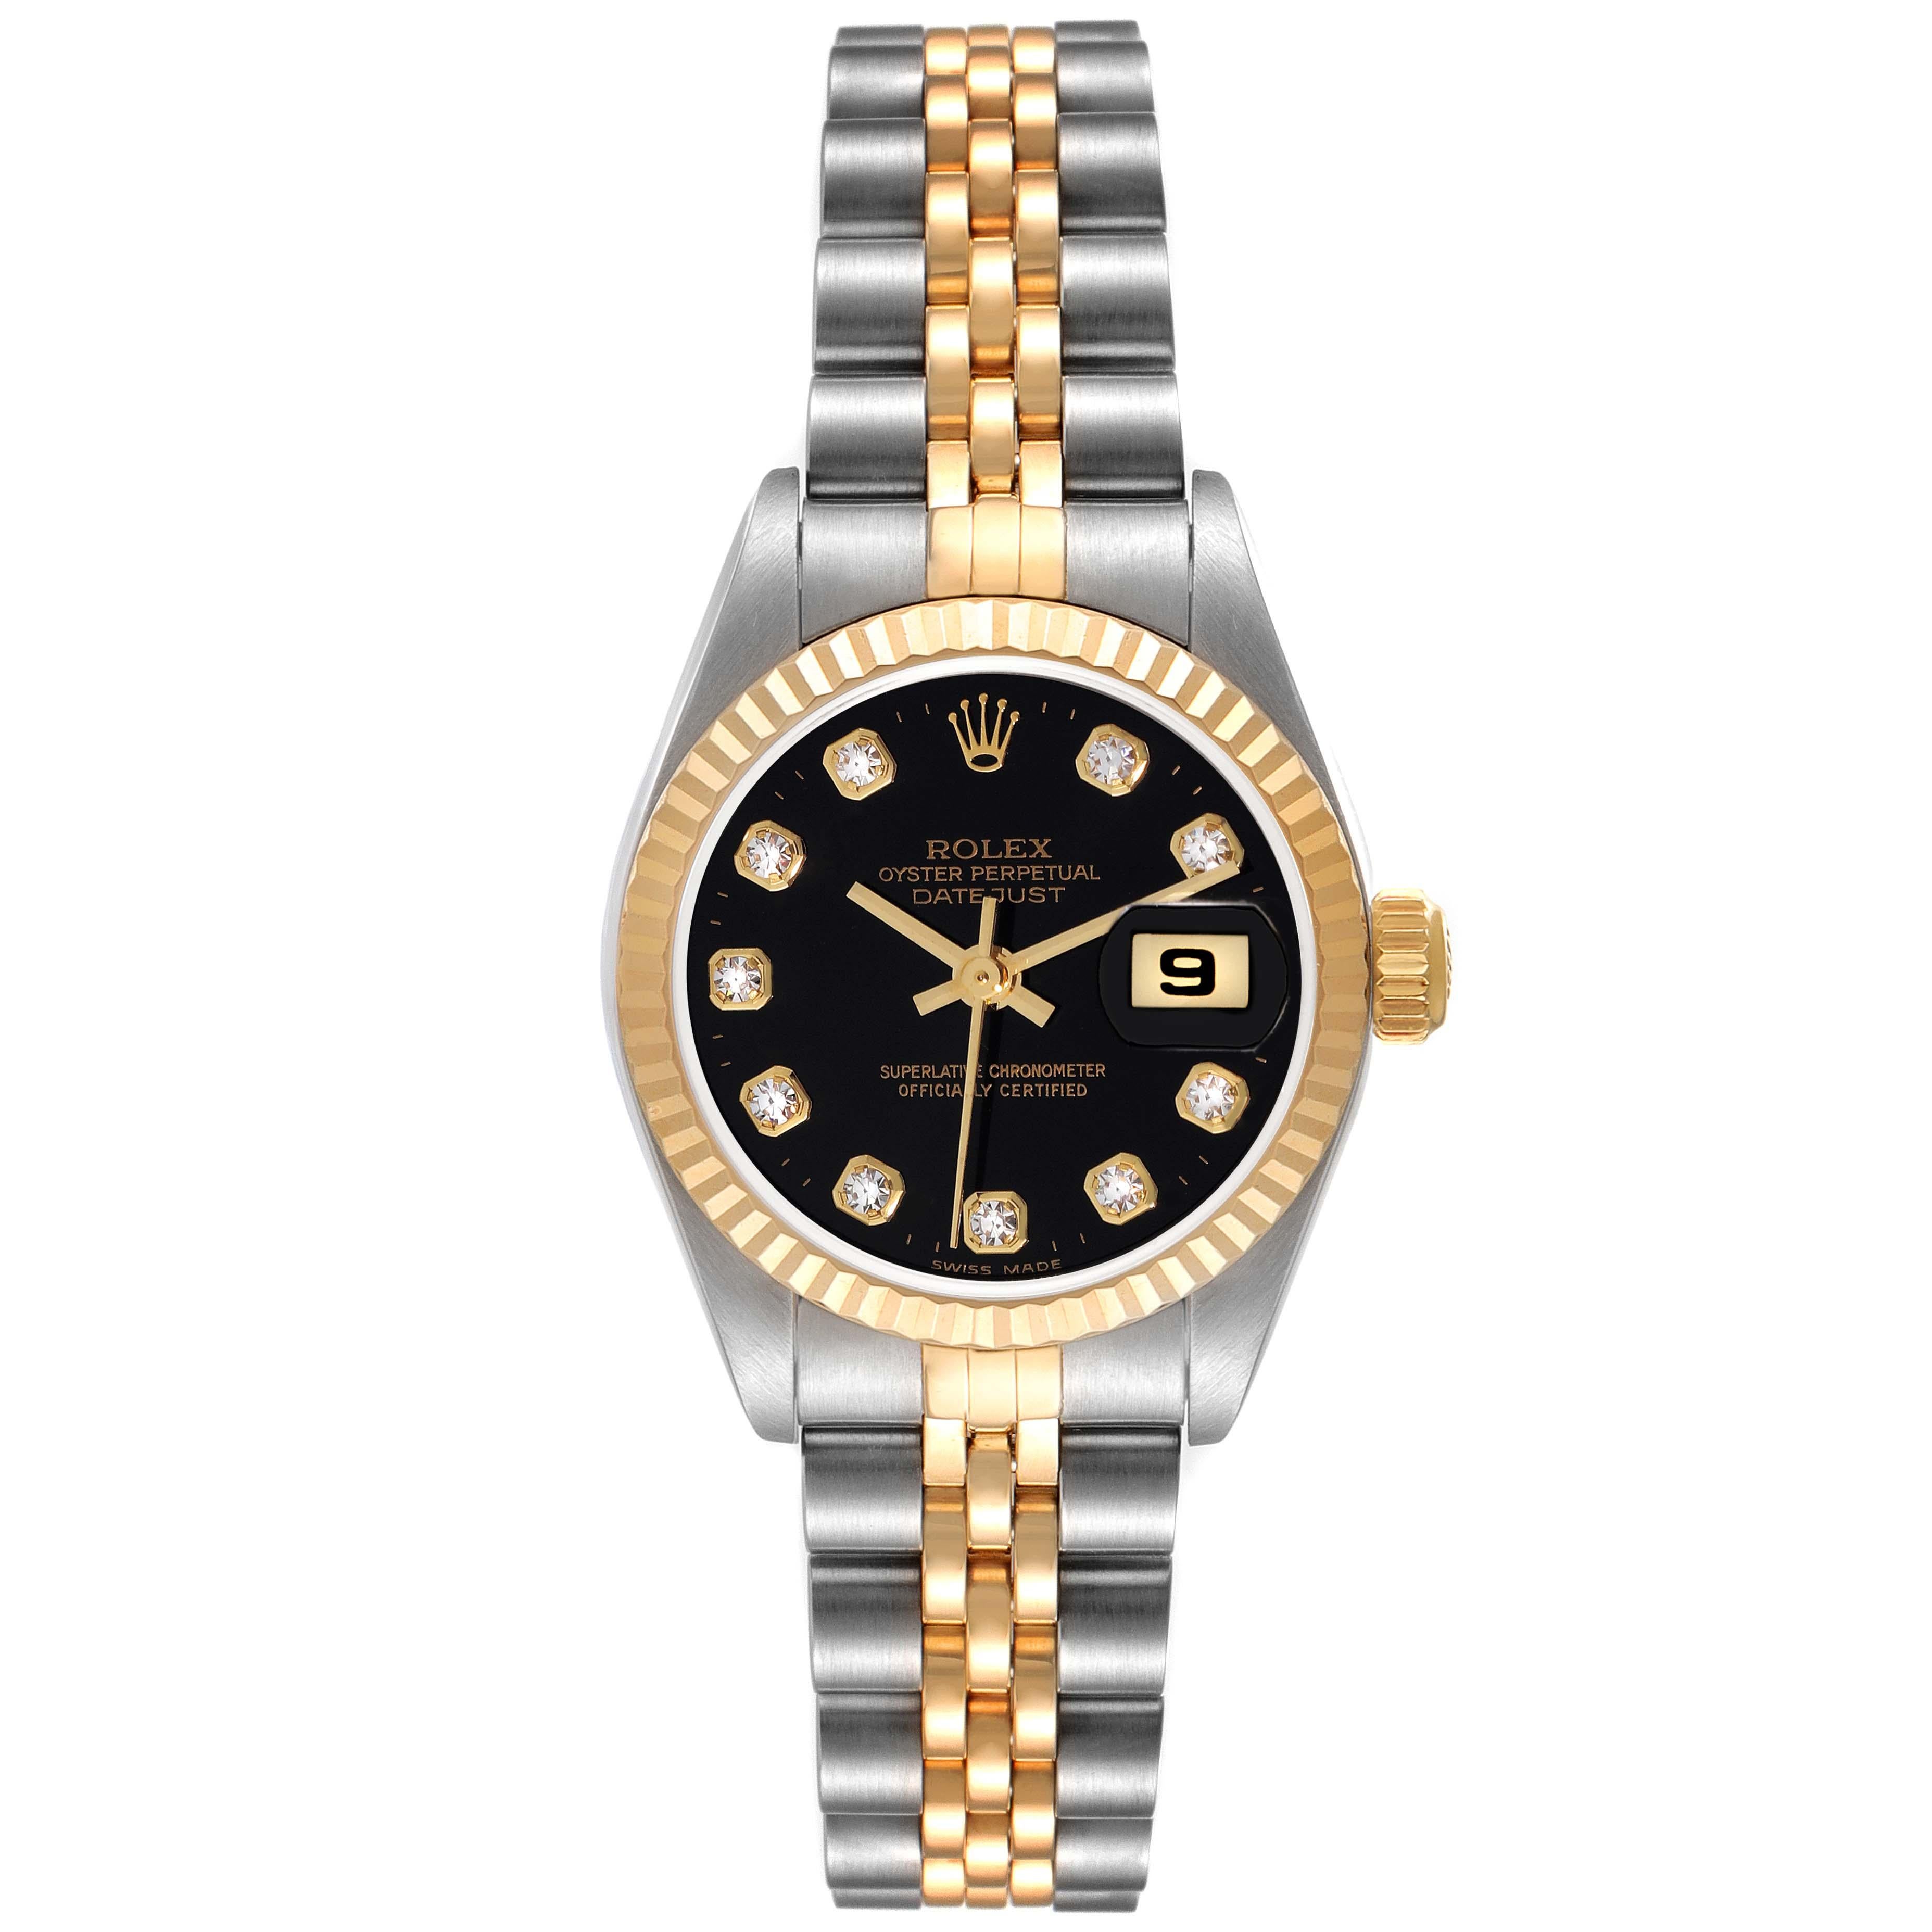 Rolex Datejust Steel Yellow Gold Black Diamond Dial Ladies Watch 79173. Officially certified chronometer automatic self-winding movement. Stainless steel oyster case 26 mm in diameter. Rolex logo on an 18K yellow gold crown. 18k yellow gold fluted